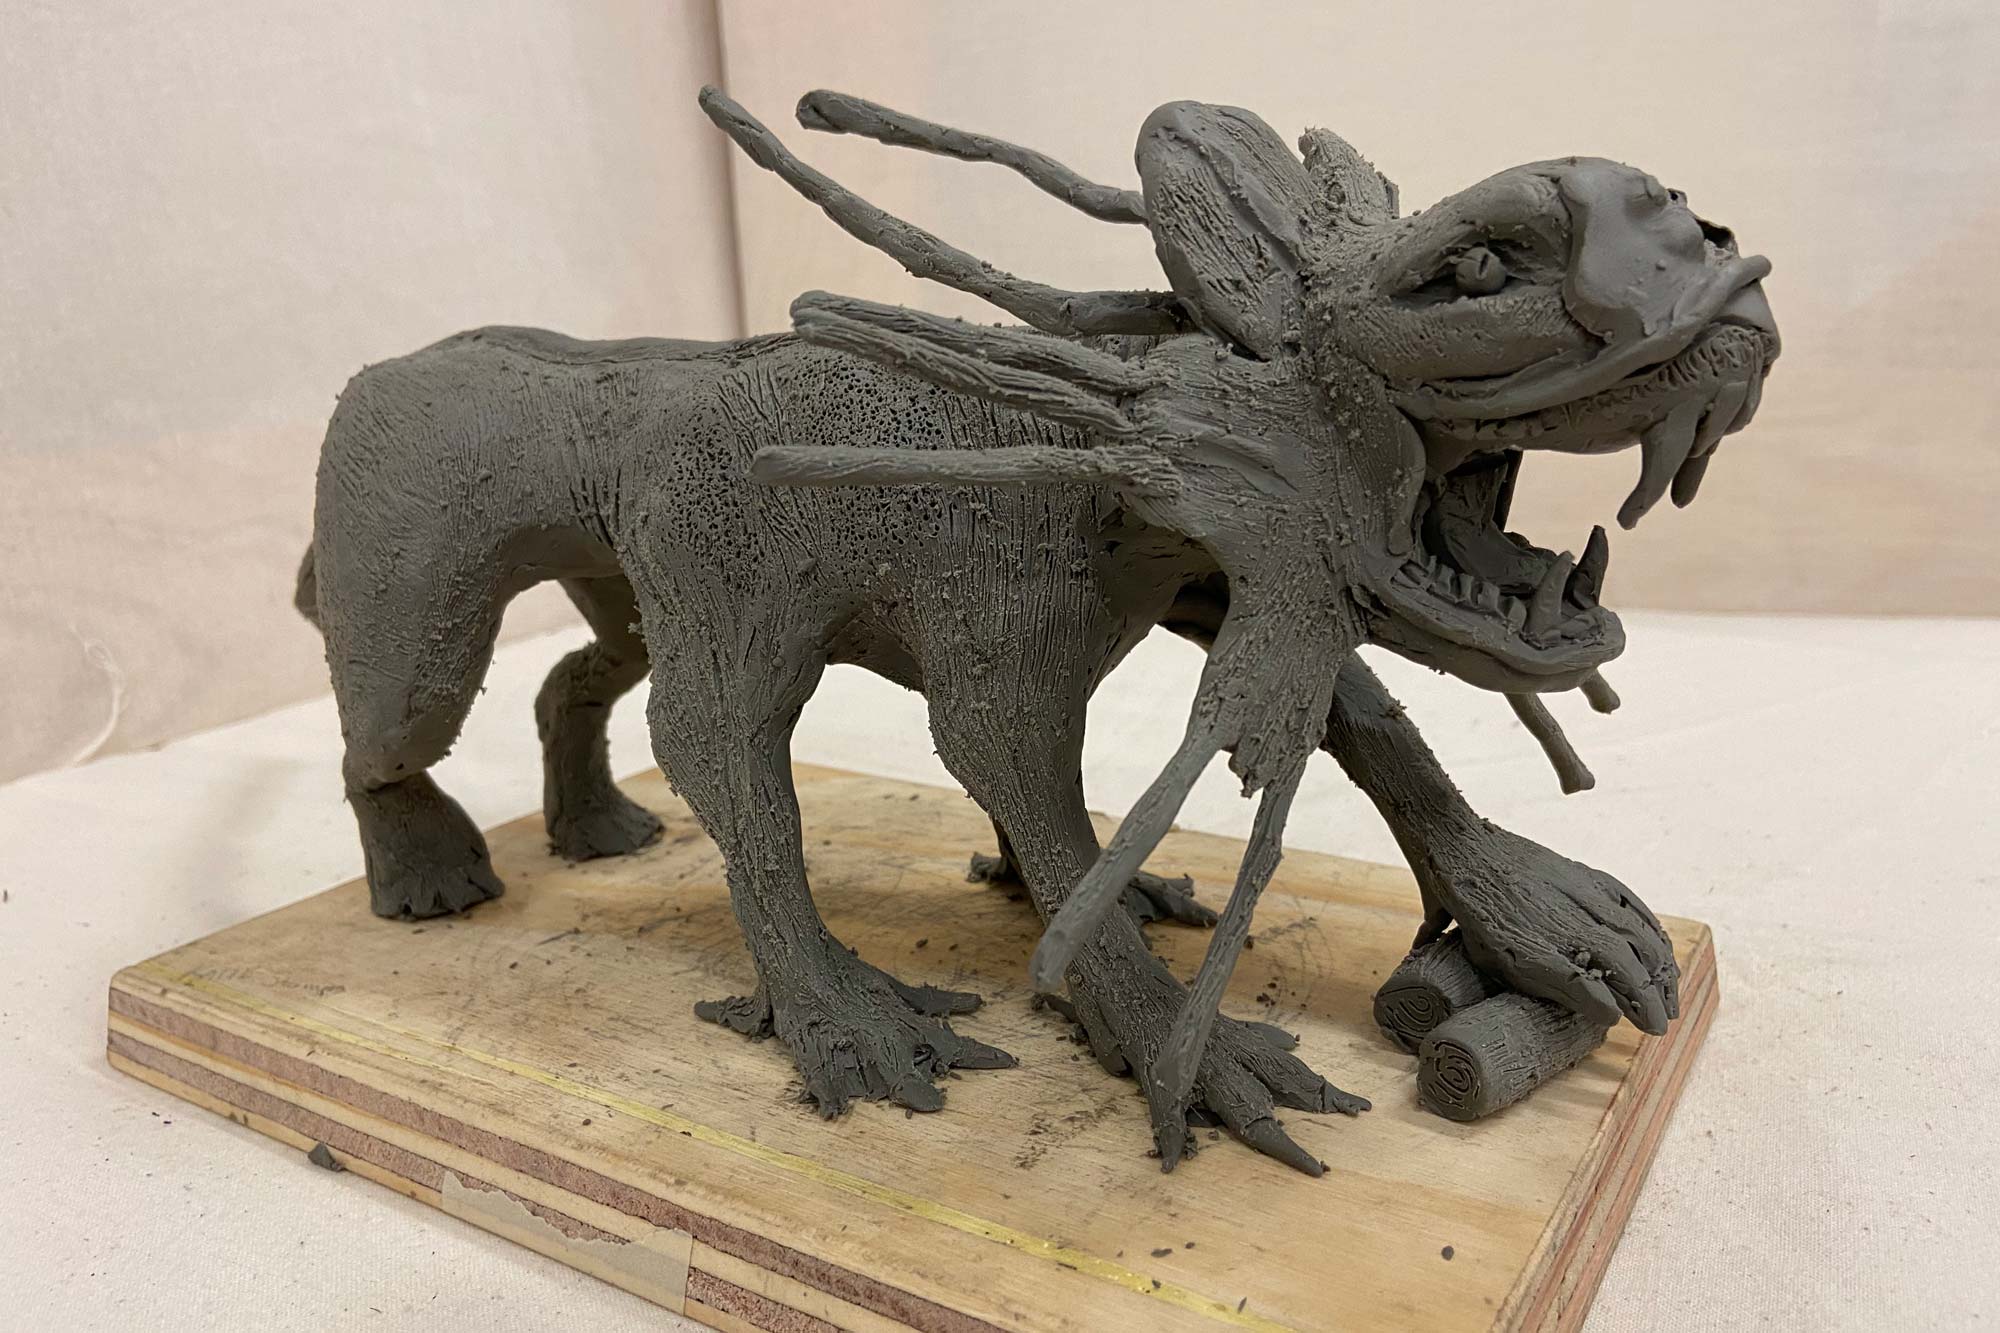 Grey Clay sculture of a 6 legged beast with sharp teeth and spikes coming out of its head